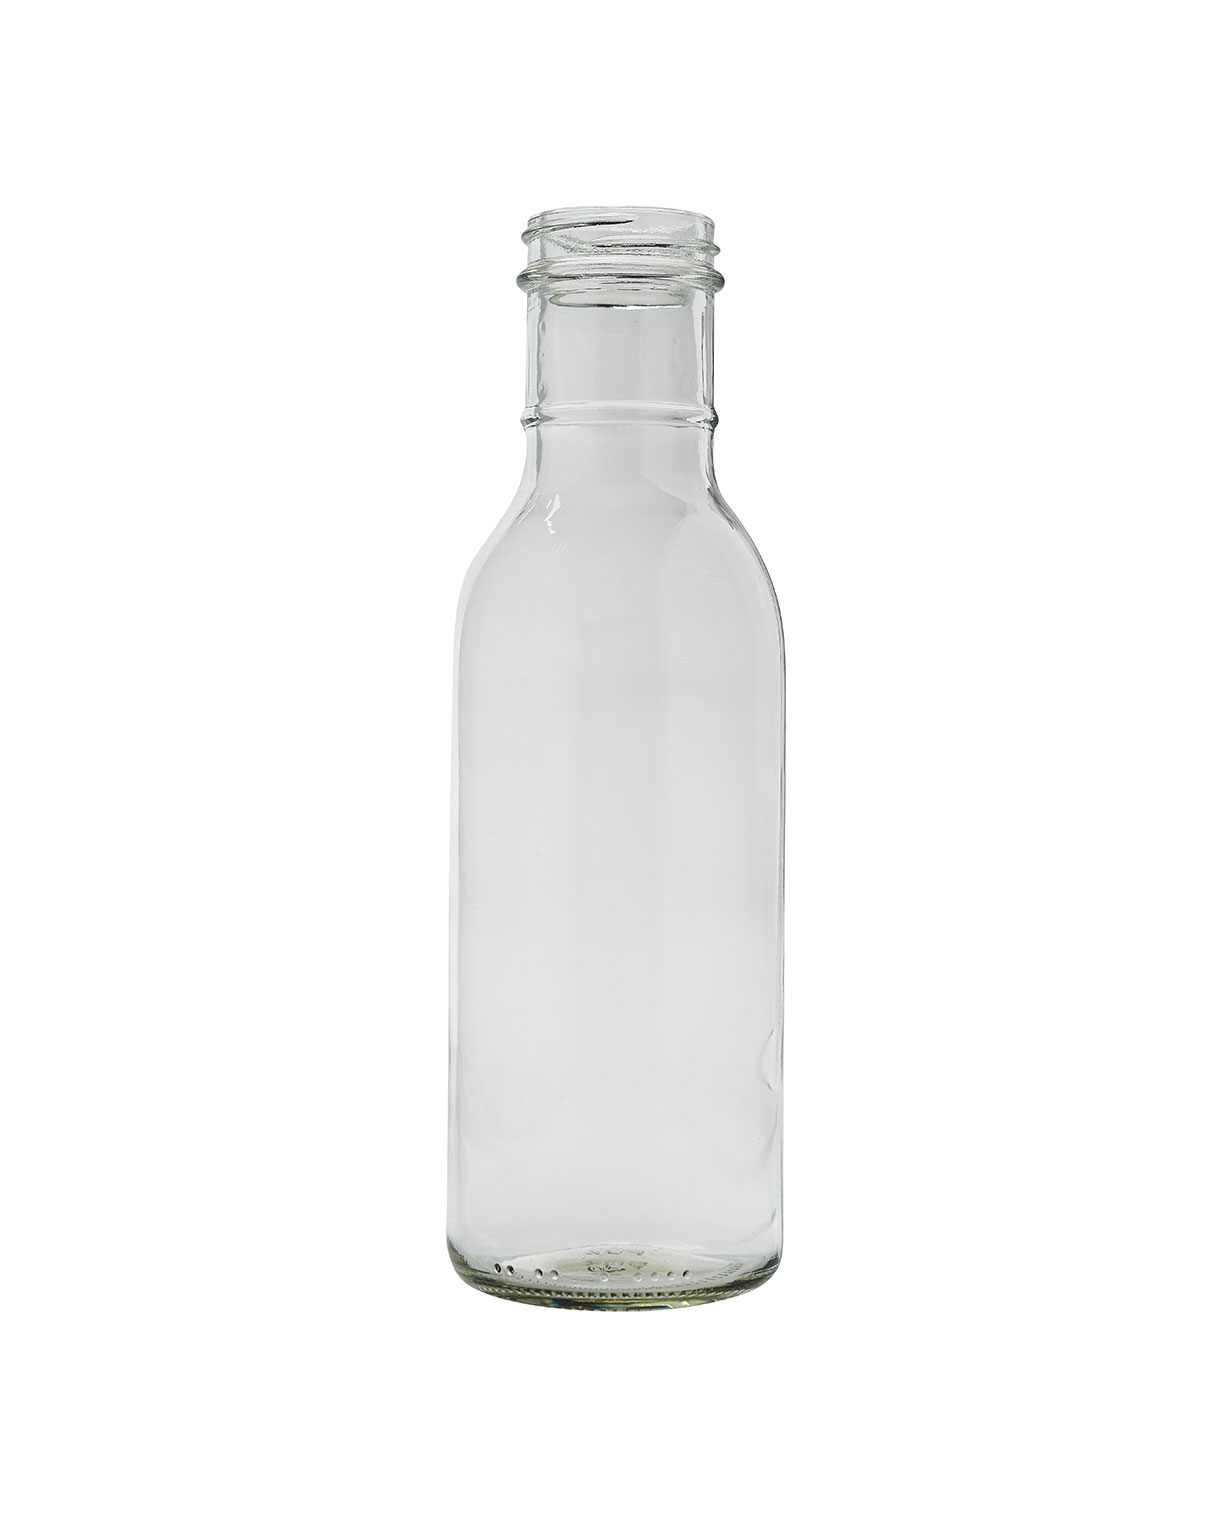 12 oz glass clear ring neck 38-400